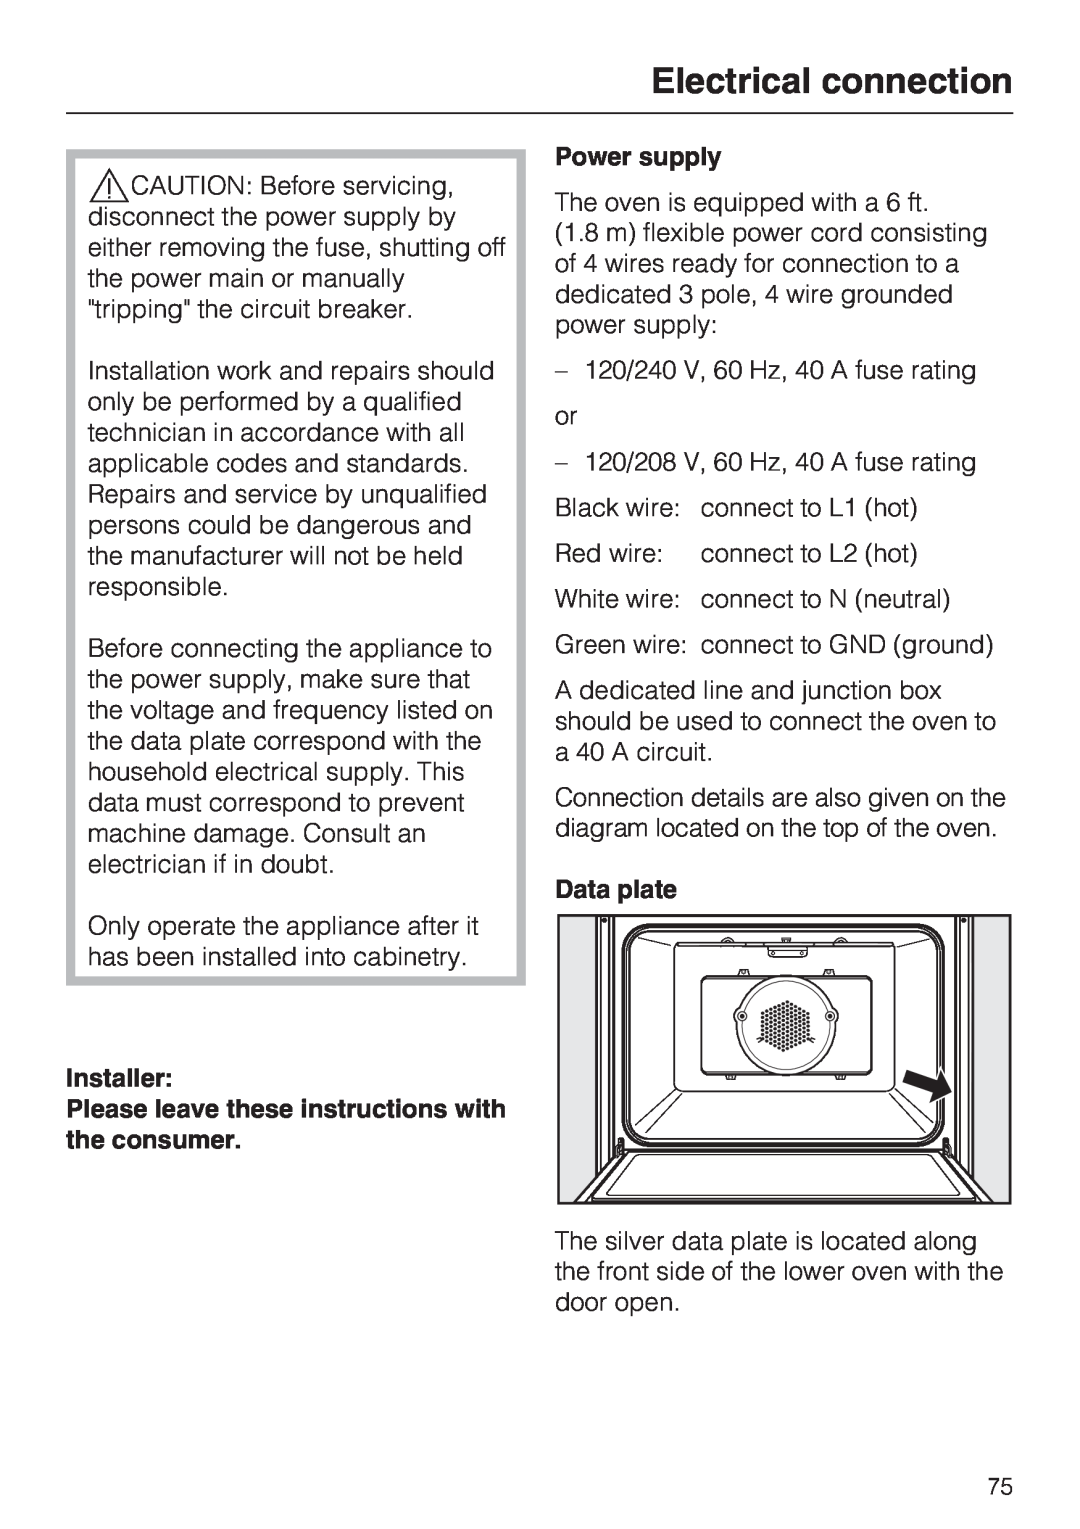 Miele H 4894 BP2 Electrical connection, Installer, Please leave these instructions with the consumer, Power supply 